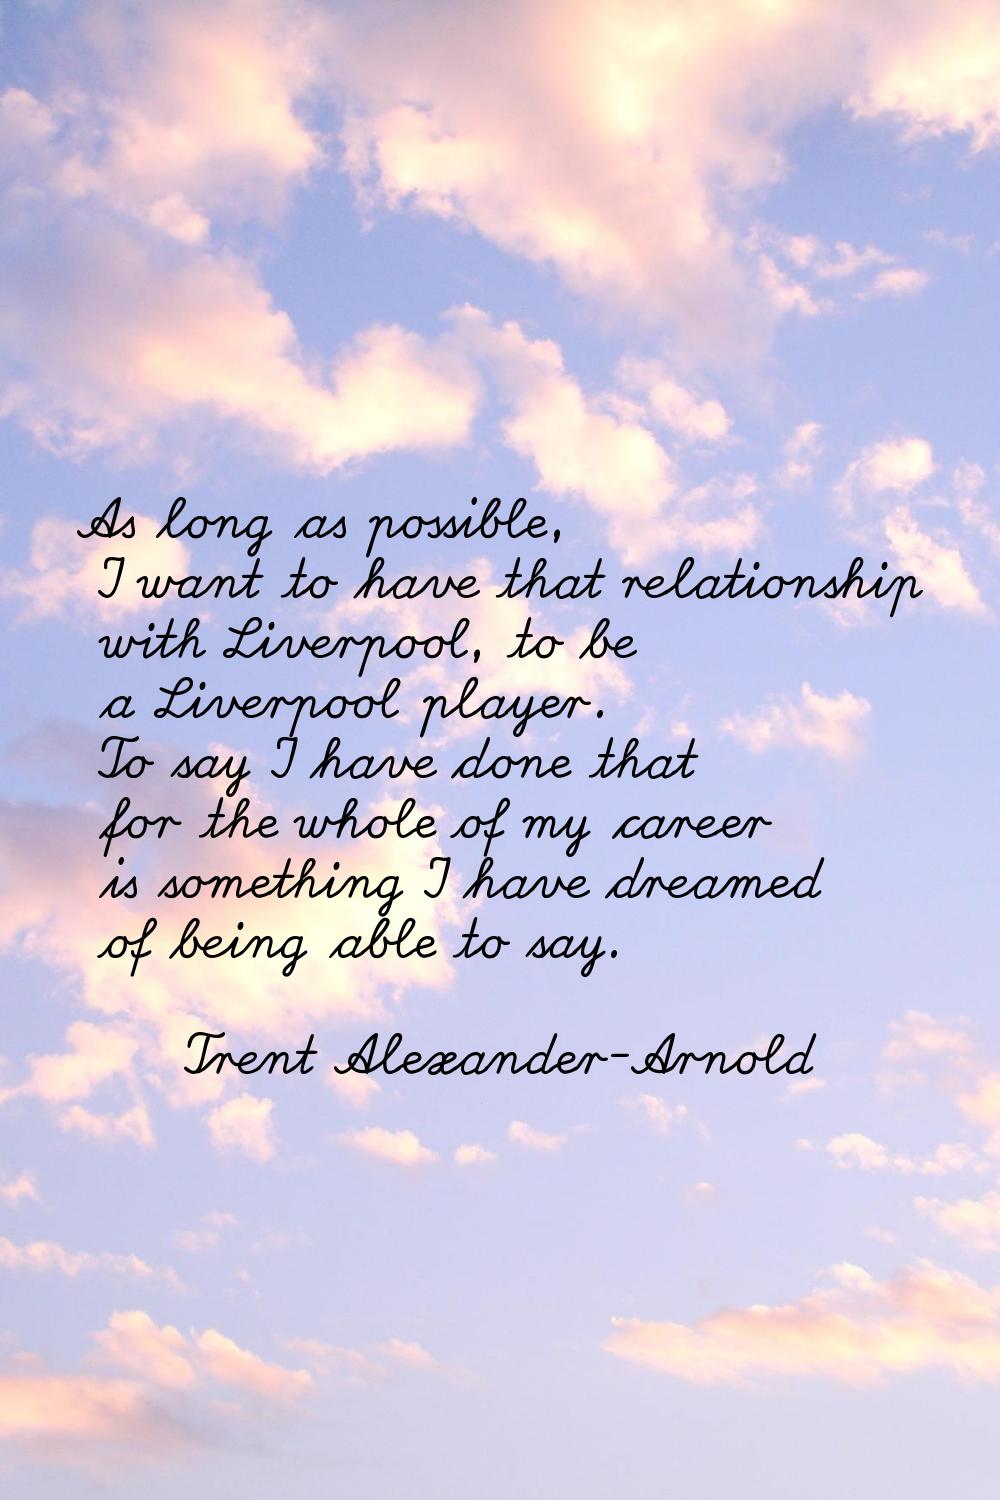 As long as possible, I want to have that relationship with Liverpool, to be a Liverpool player. To 